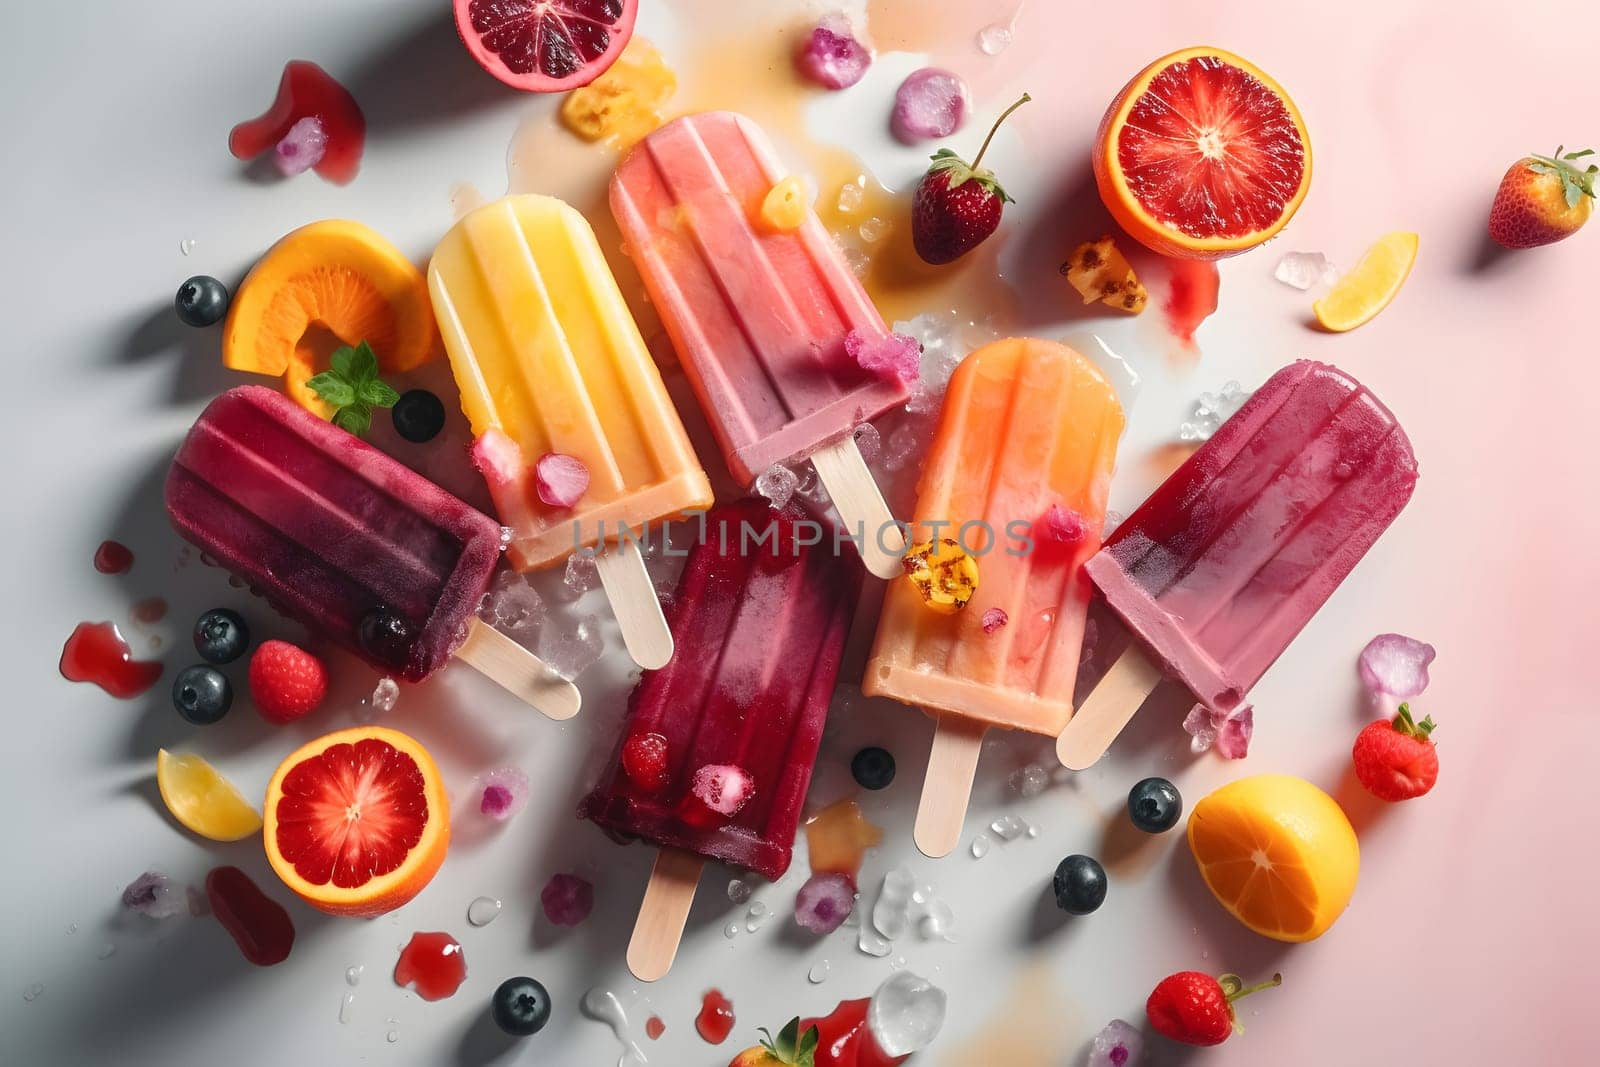 ice cream popsicles with fruits and ice cube on flat surface, high angle view, neural network generated image by z1b